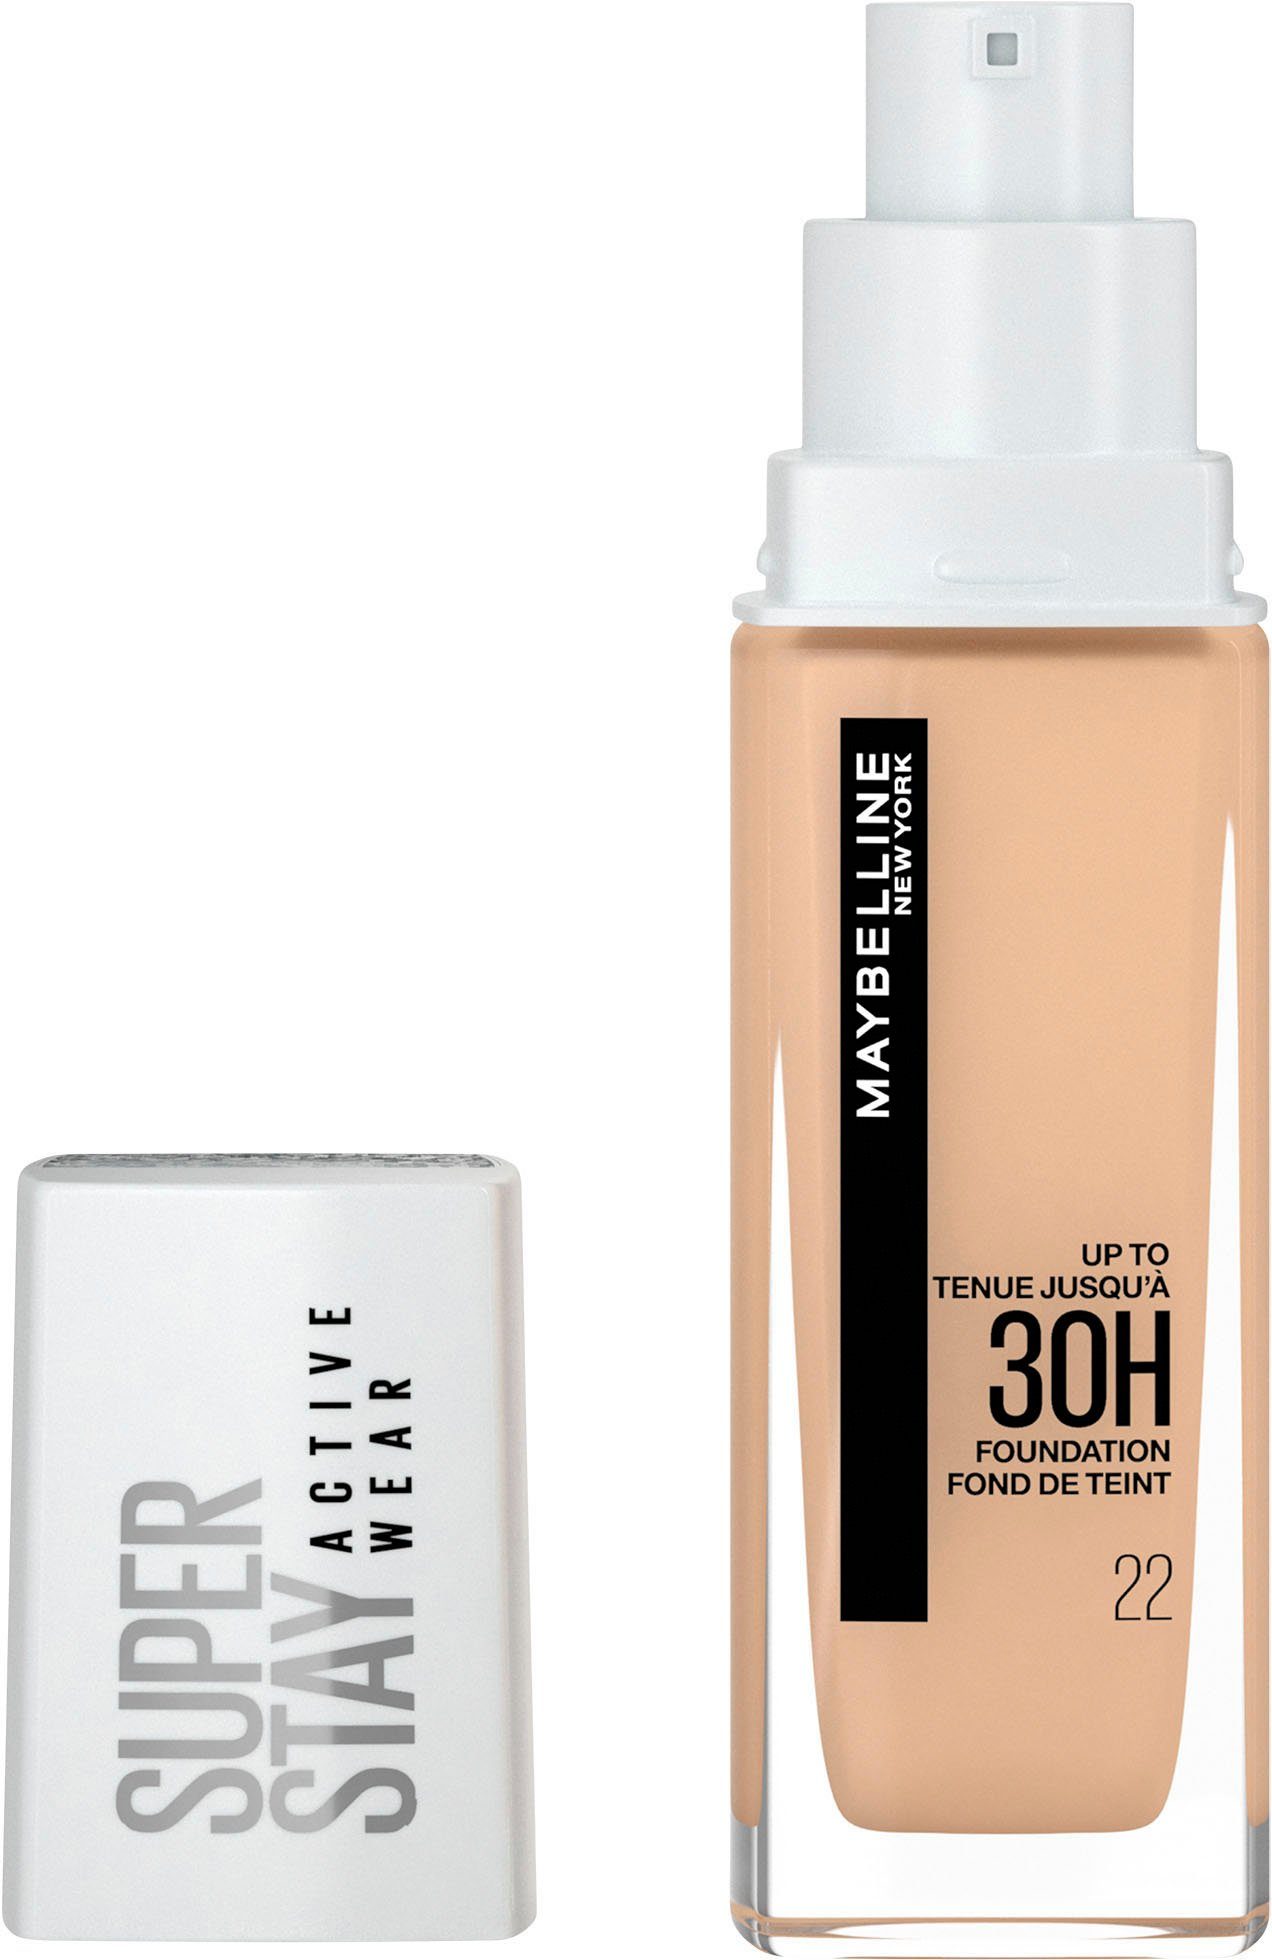 NEW Foundation MAYBELLINE Super Light 22 YORK Stay Bisque Active Wear